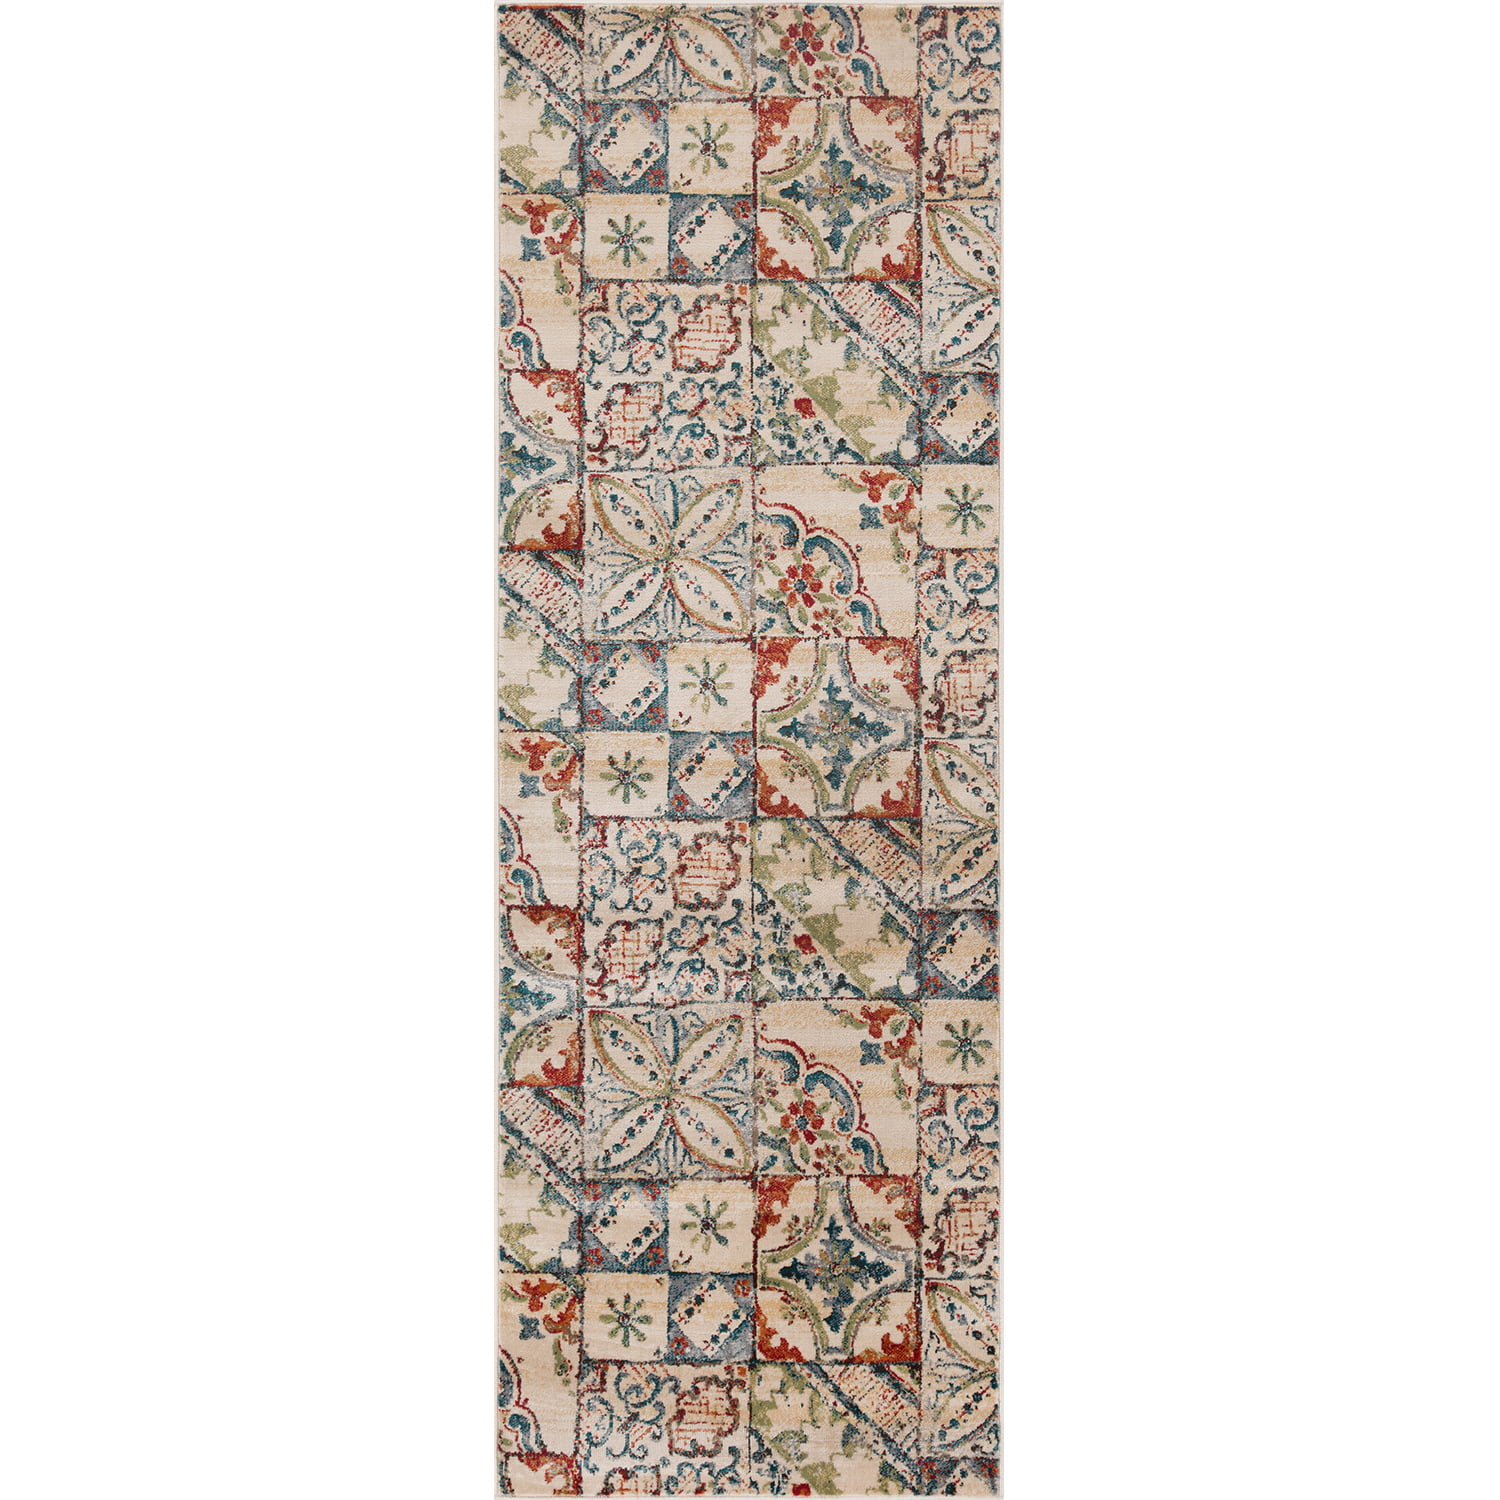 Beige by Blue Nile Mills for Hallway BLUENILEMILLS Transitional Floral Medallion Indoor Area Rug Collection with Jute Backing 5' x 8' Living Room Bedroom